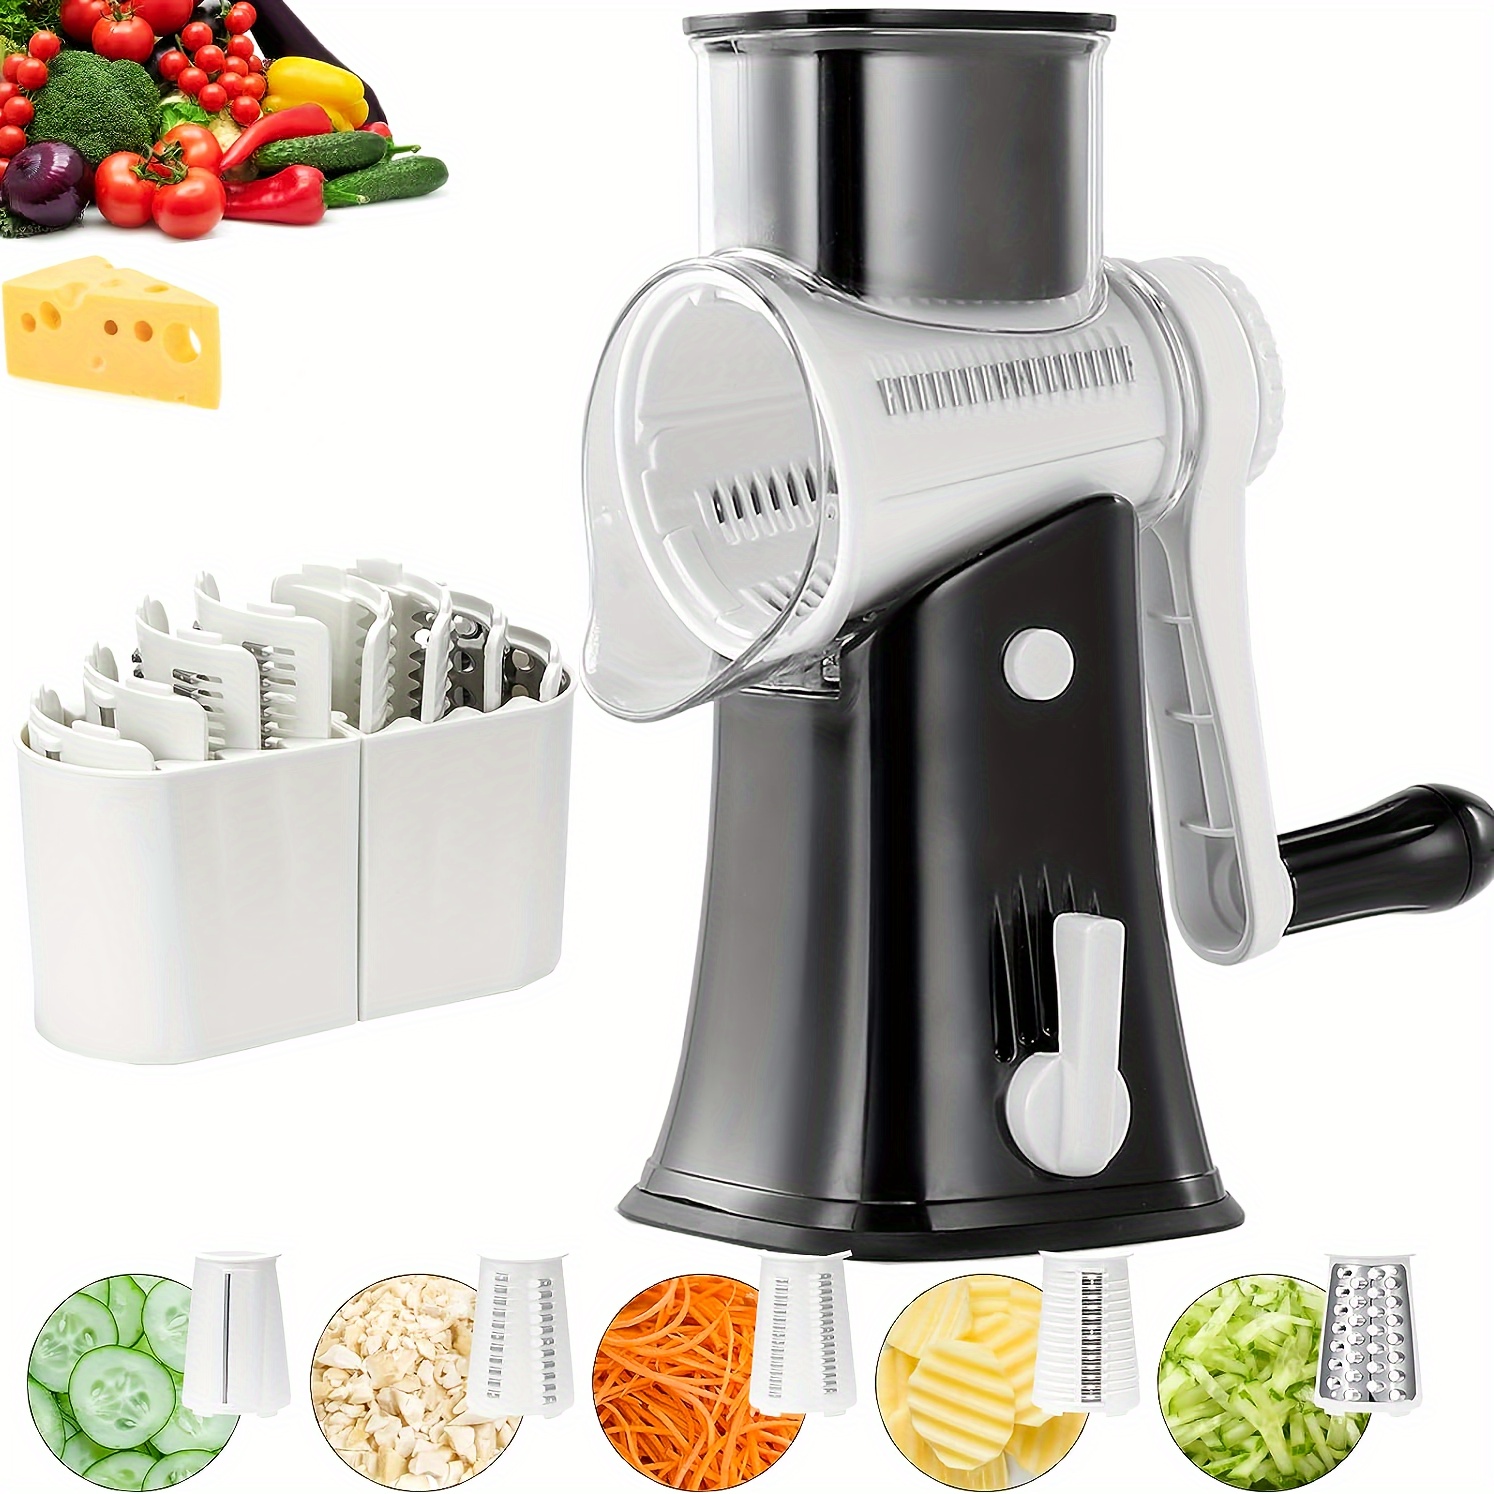 Vekaya 5 In 1 Rotary Cheese Grater With Handle [5 Interchangeable